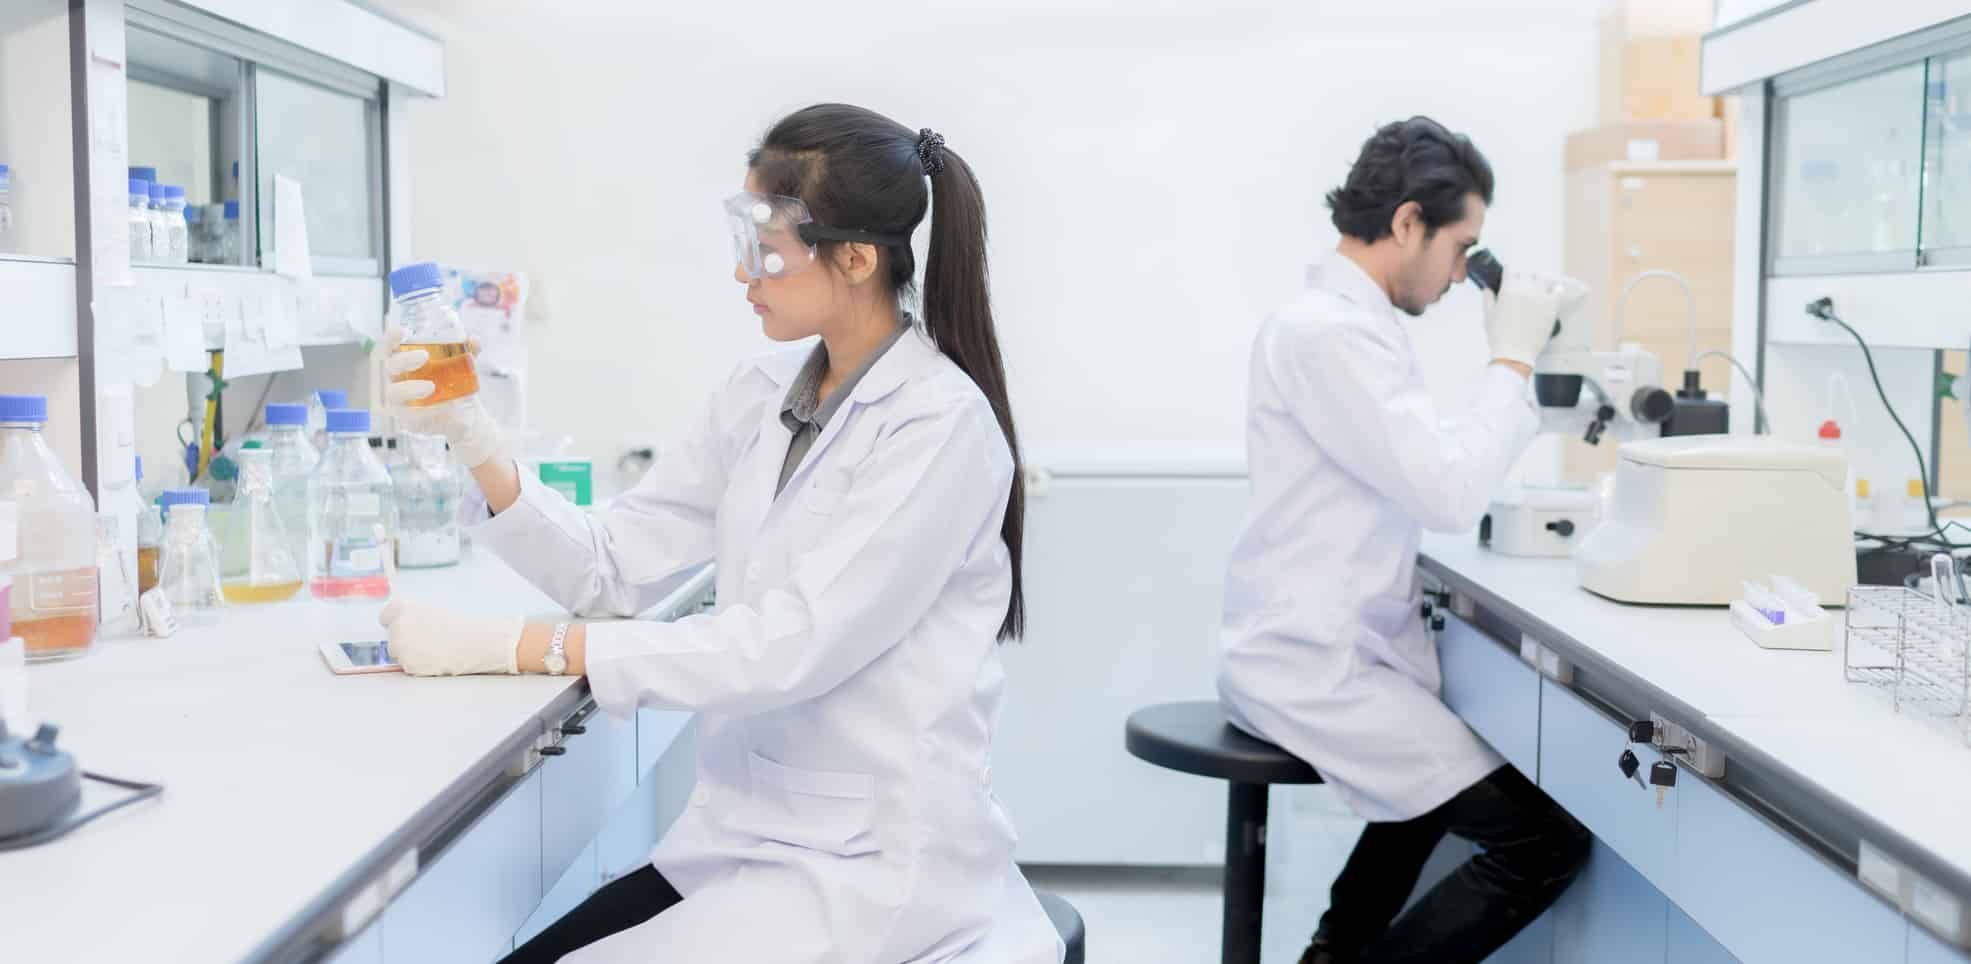 Handling Stress in a Laboratory Environment